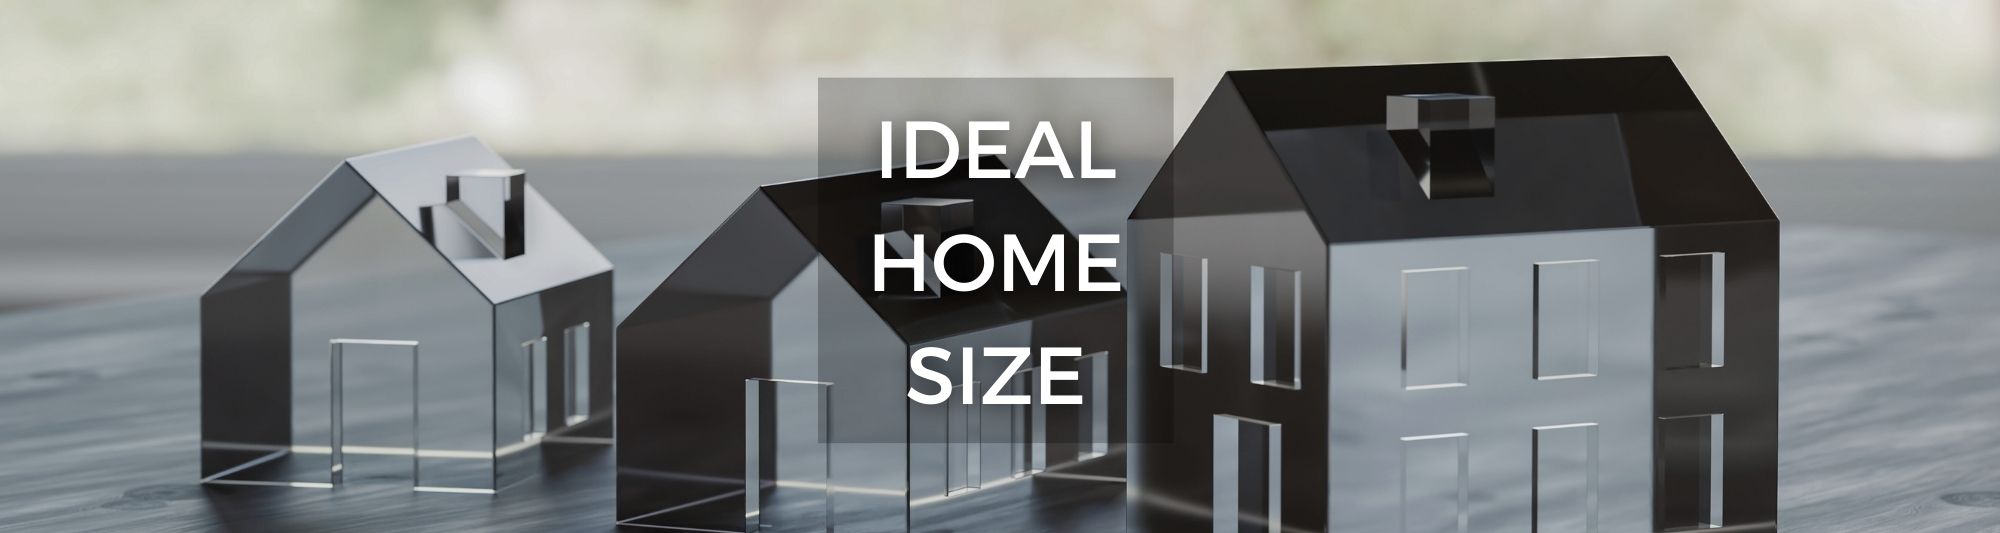 Photo of glass homes with different sizes to represent the blog post about Ideal home sizea